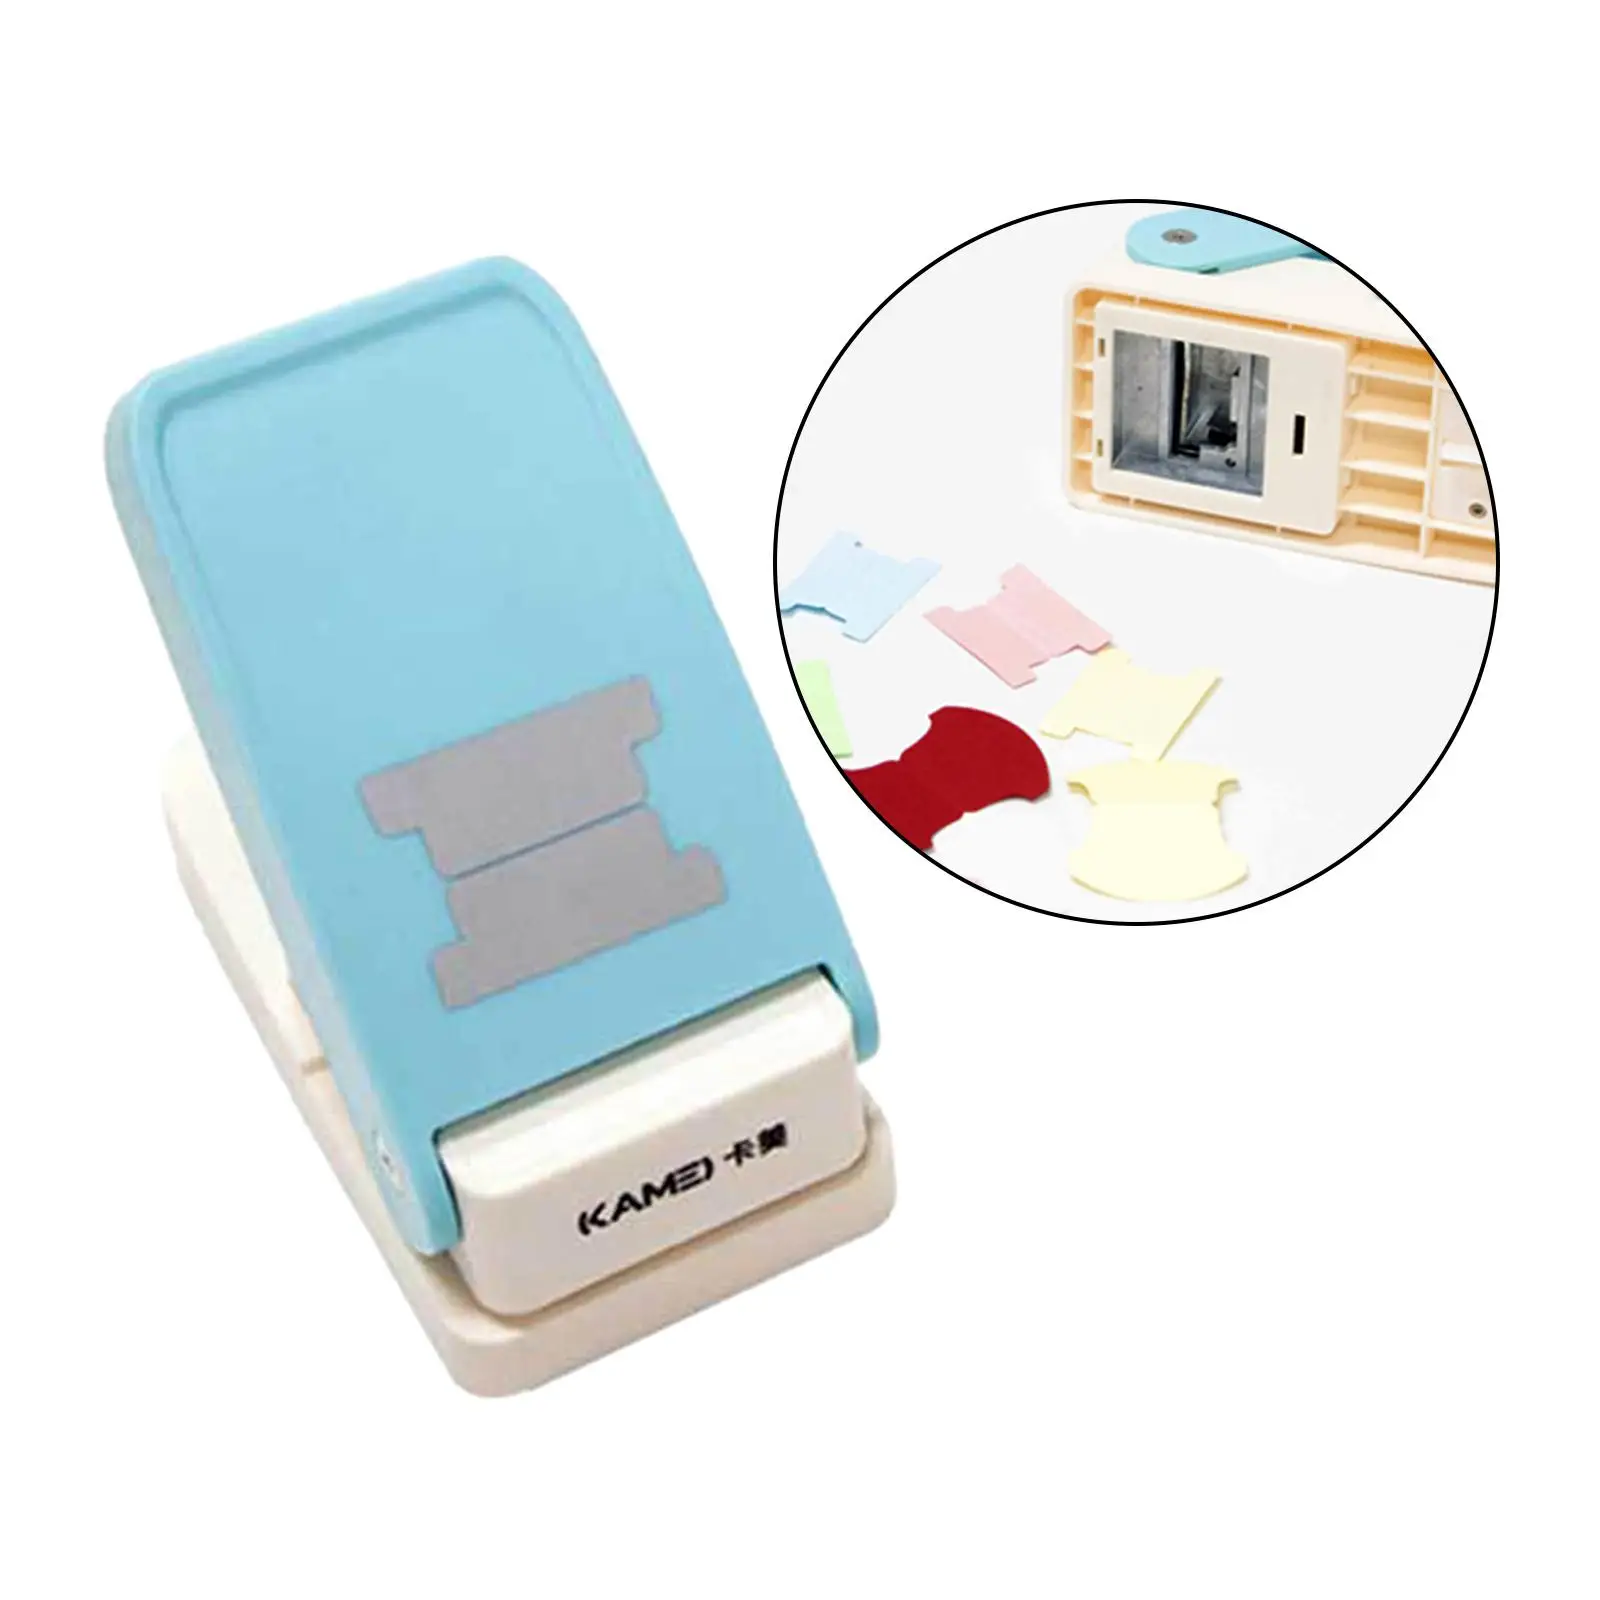 Tab Punch Paper Punches Multifunctional Paper Punching for Handmade Project Card Making Sketchbook Paper Notebook DIY Bookmark